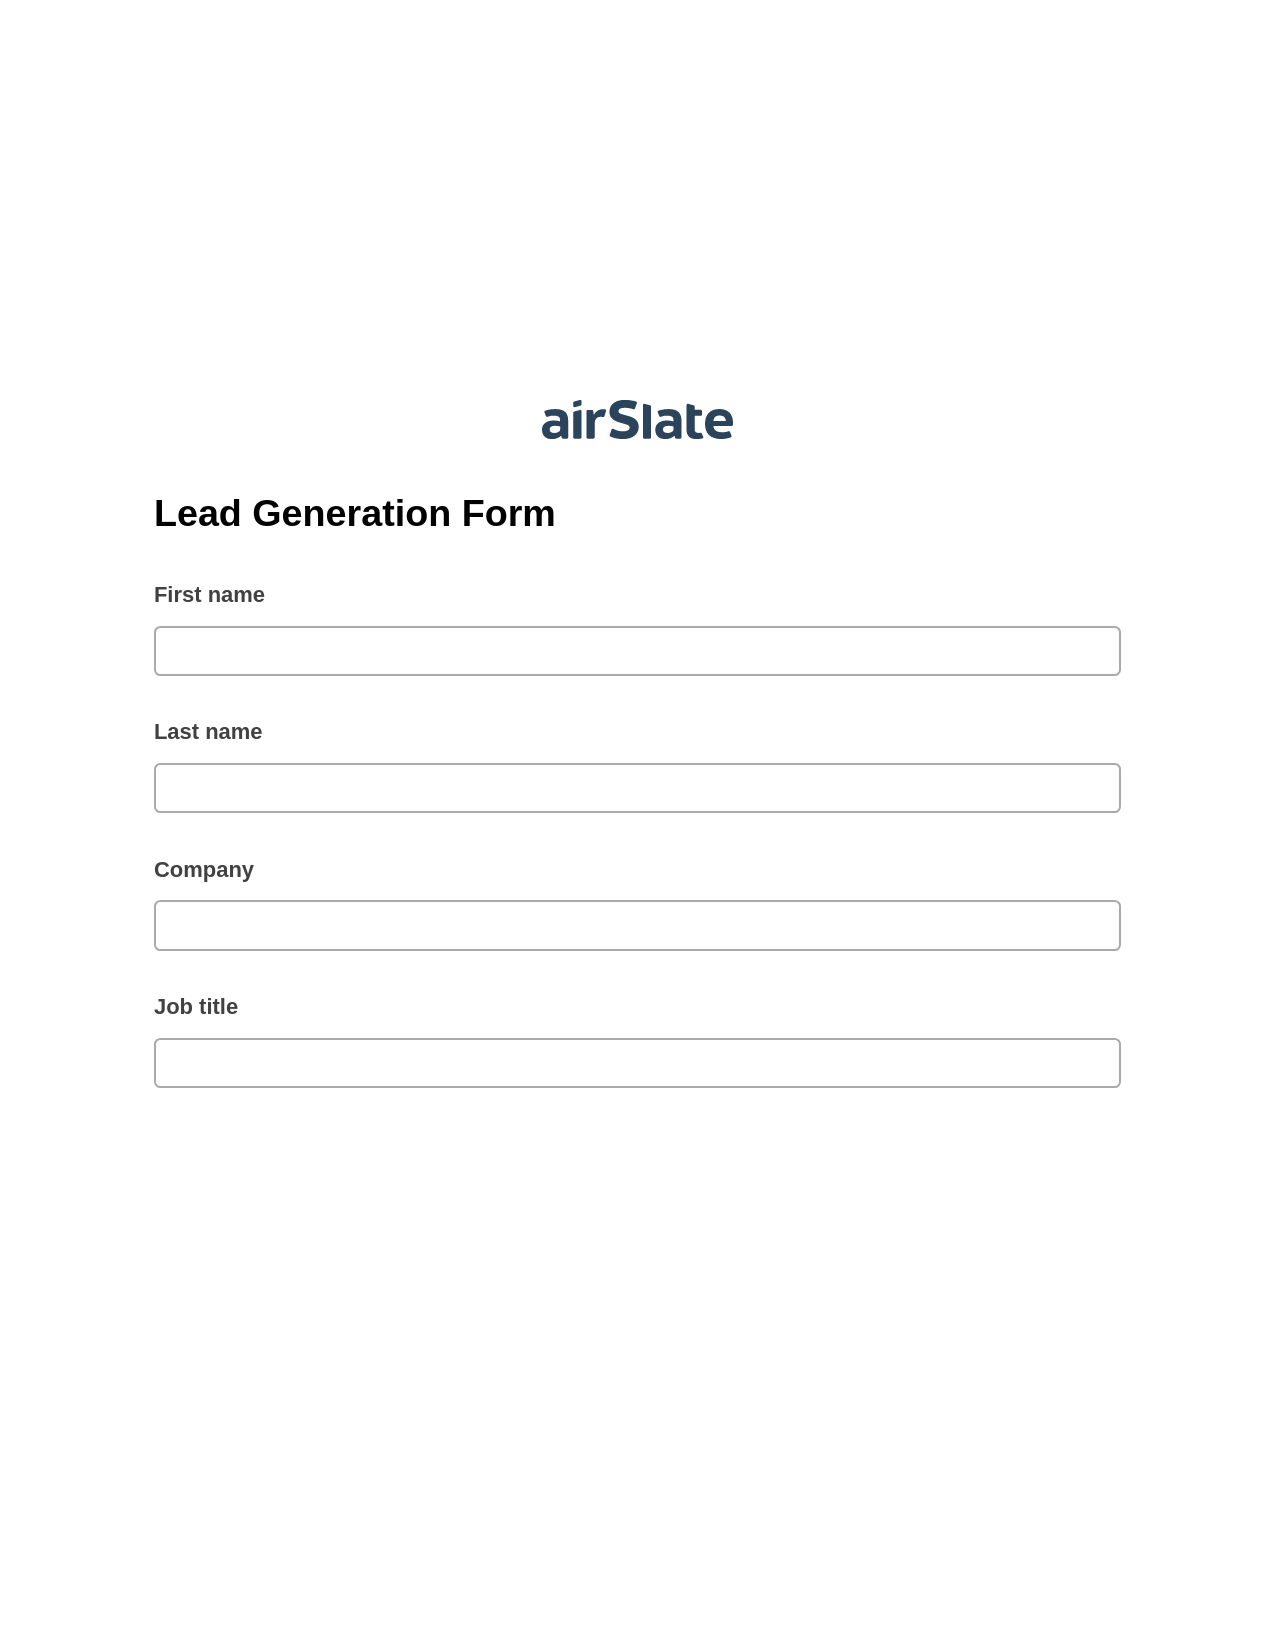 Lead Generation Form Pre-fill from Excel Spreadsheet Bot, Remove Tags From Slate Bot, Export to Google Sheet Bot